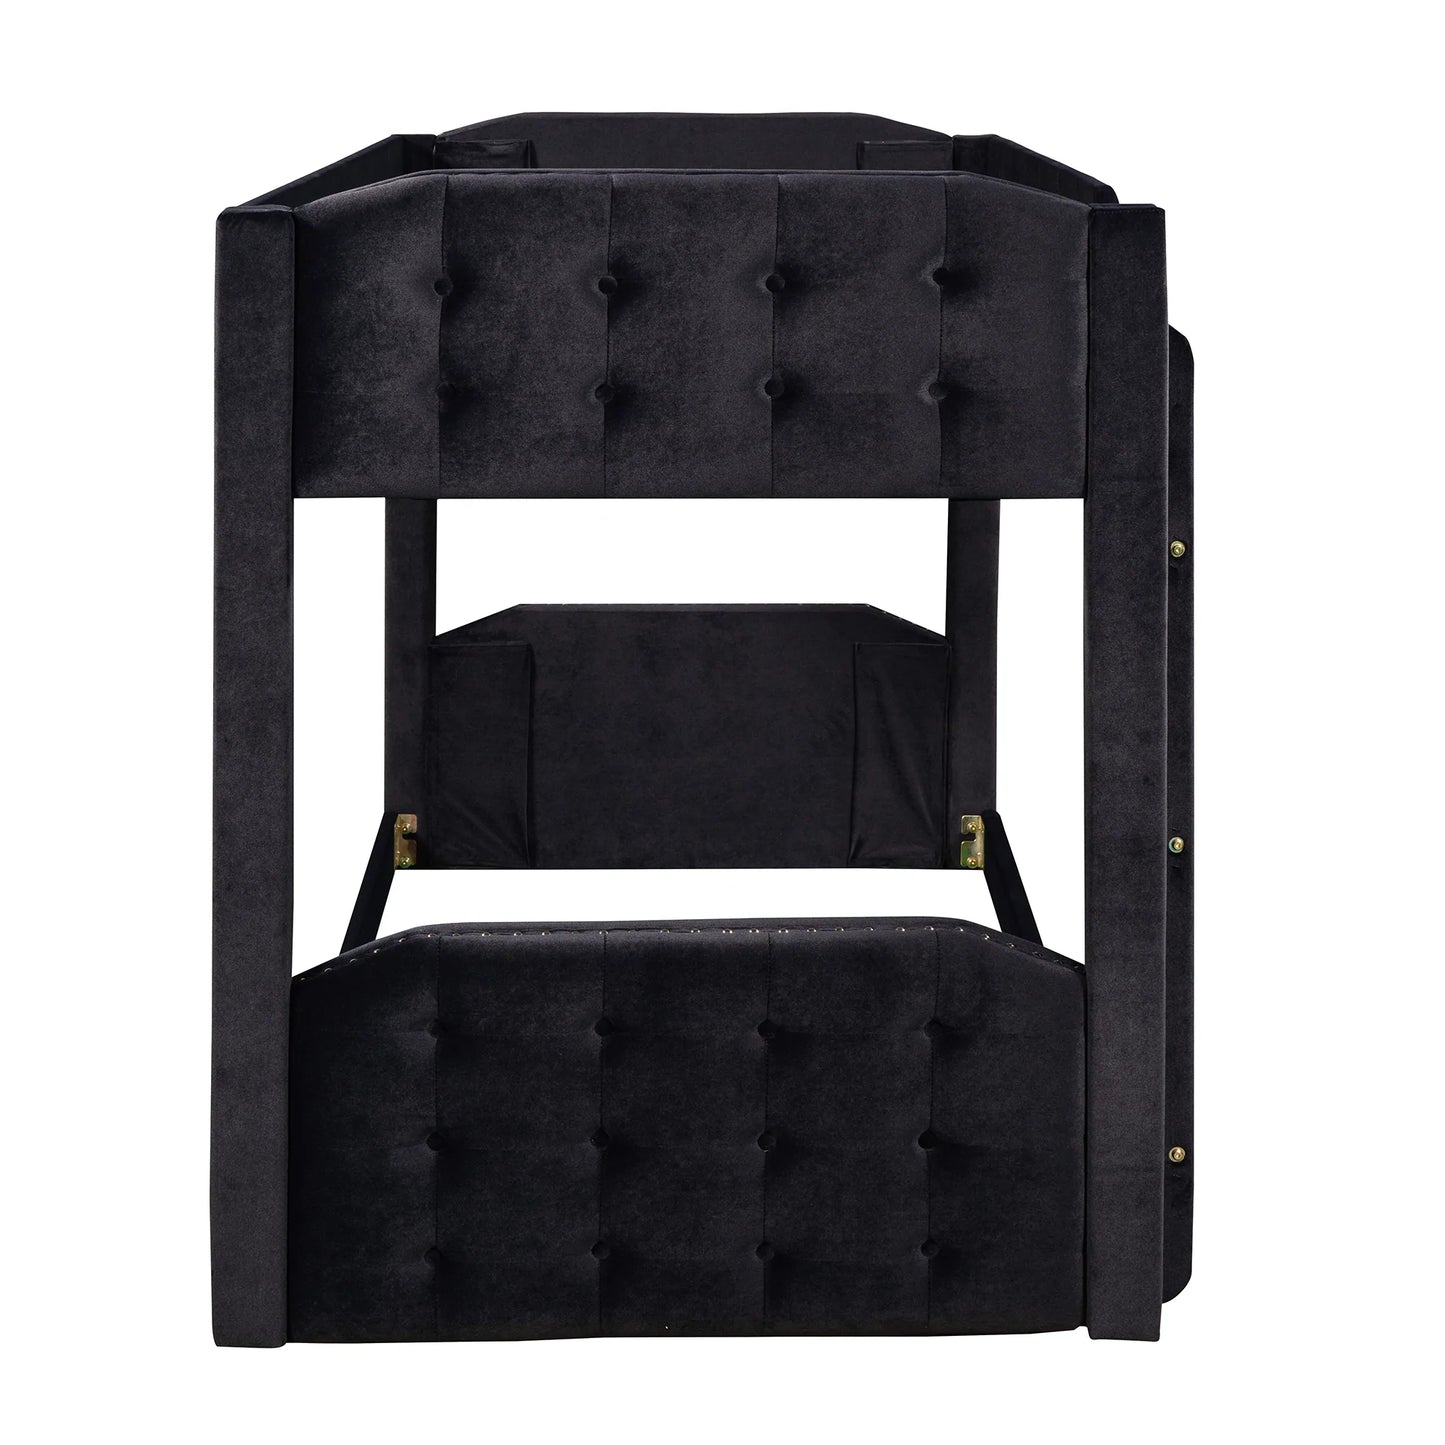 Bed Button Tufted Headboard and Footboard Design in Black